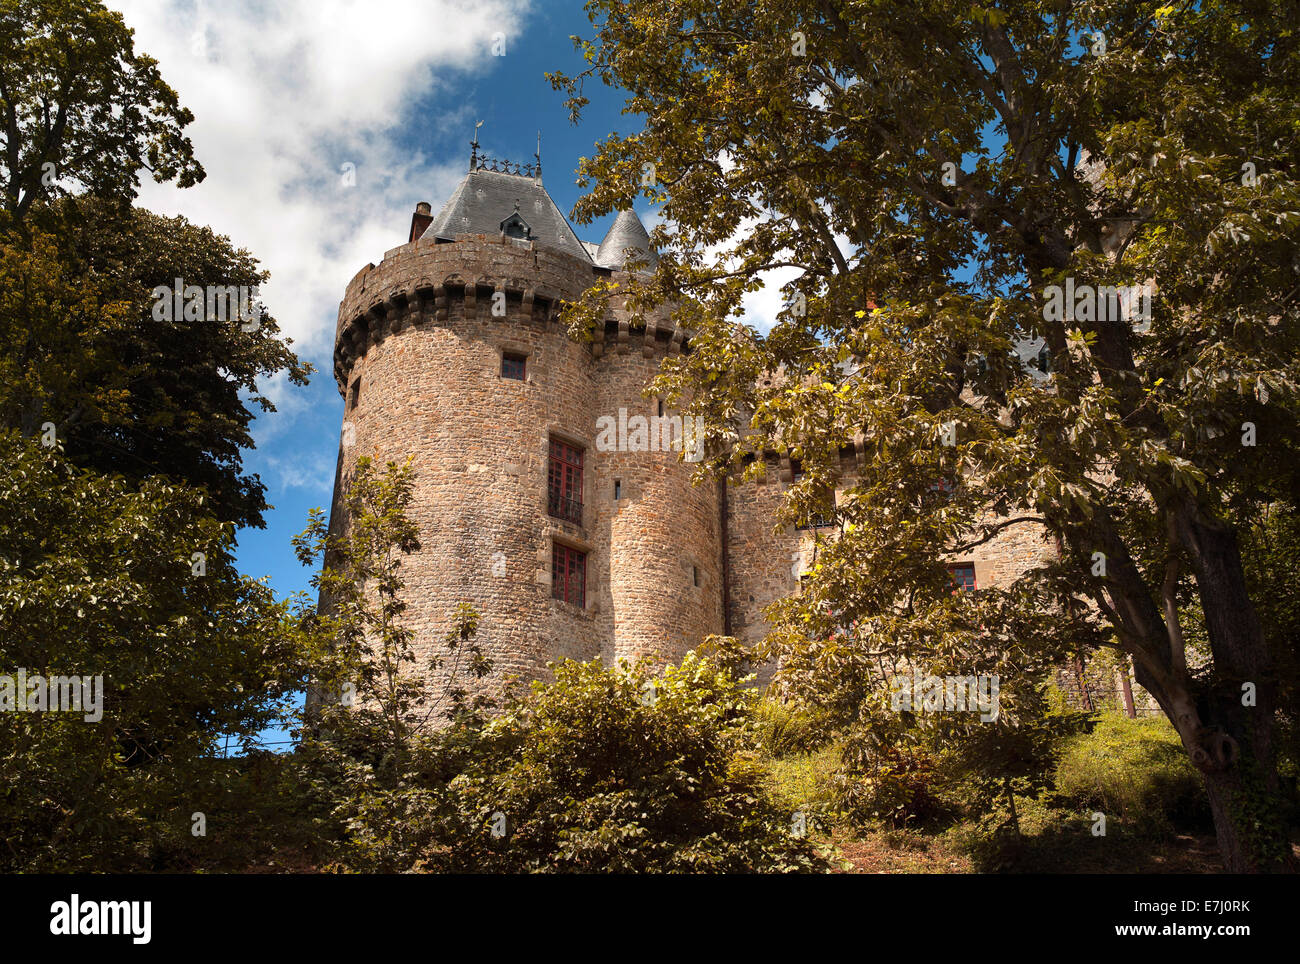 Chateau de Combourg, Brittany, France Stock Photo